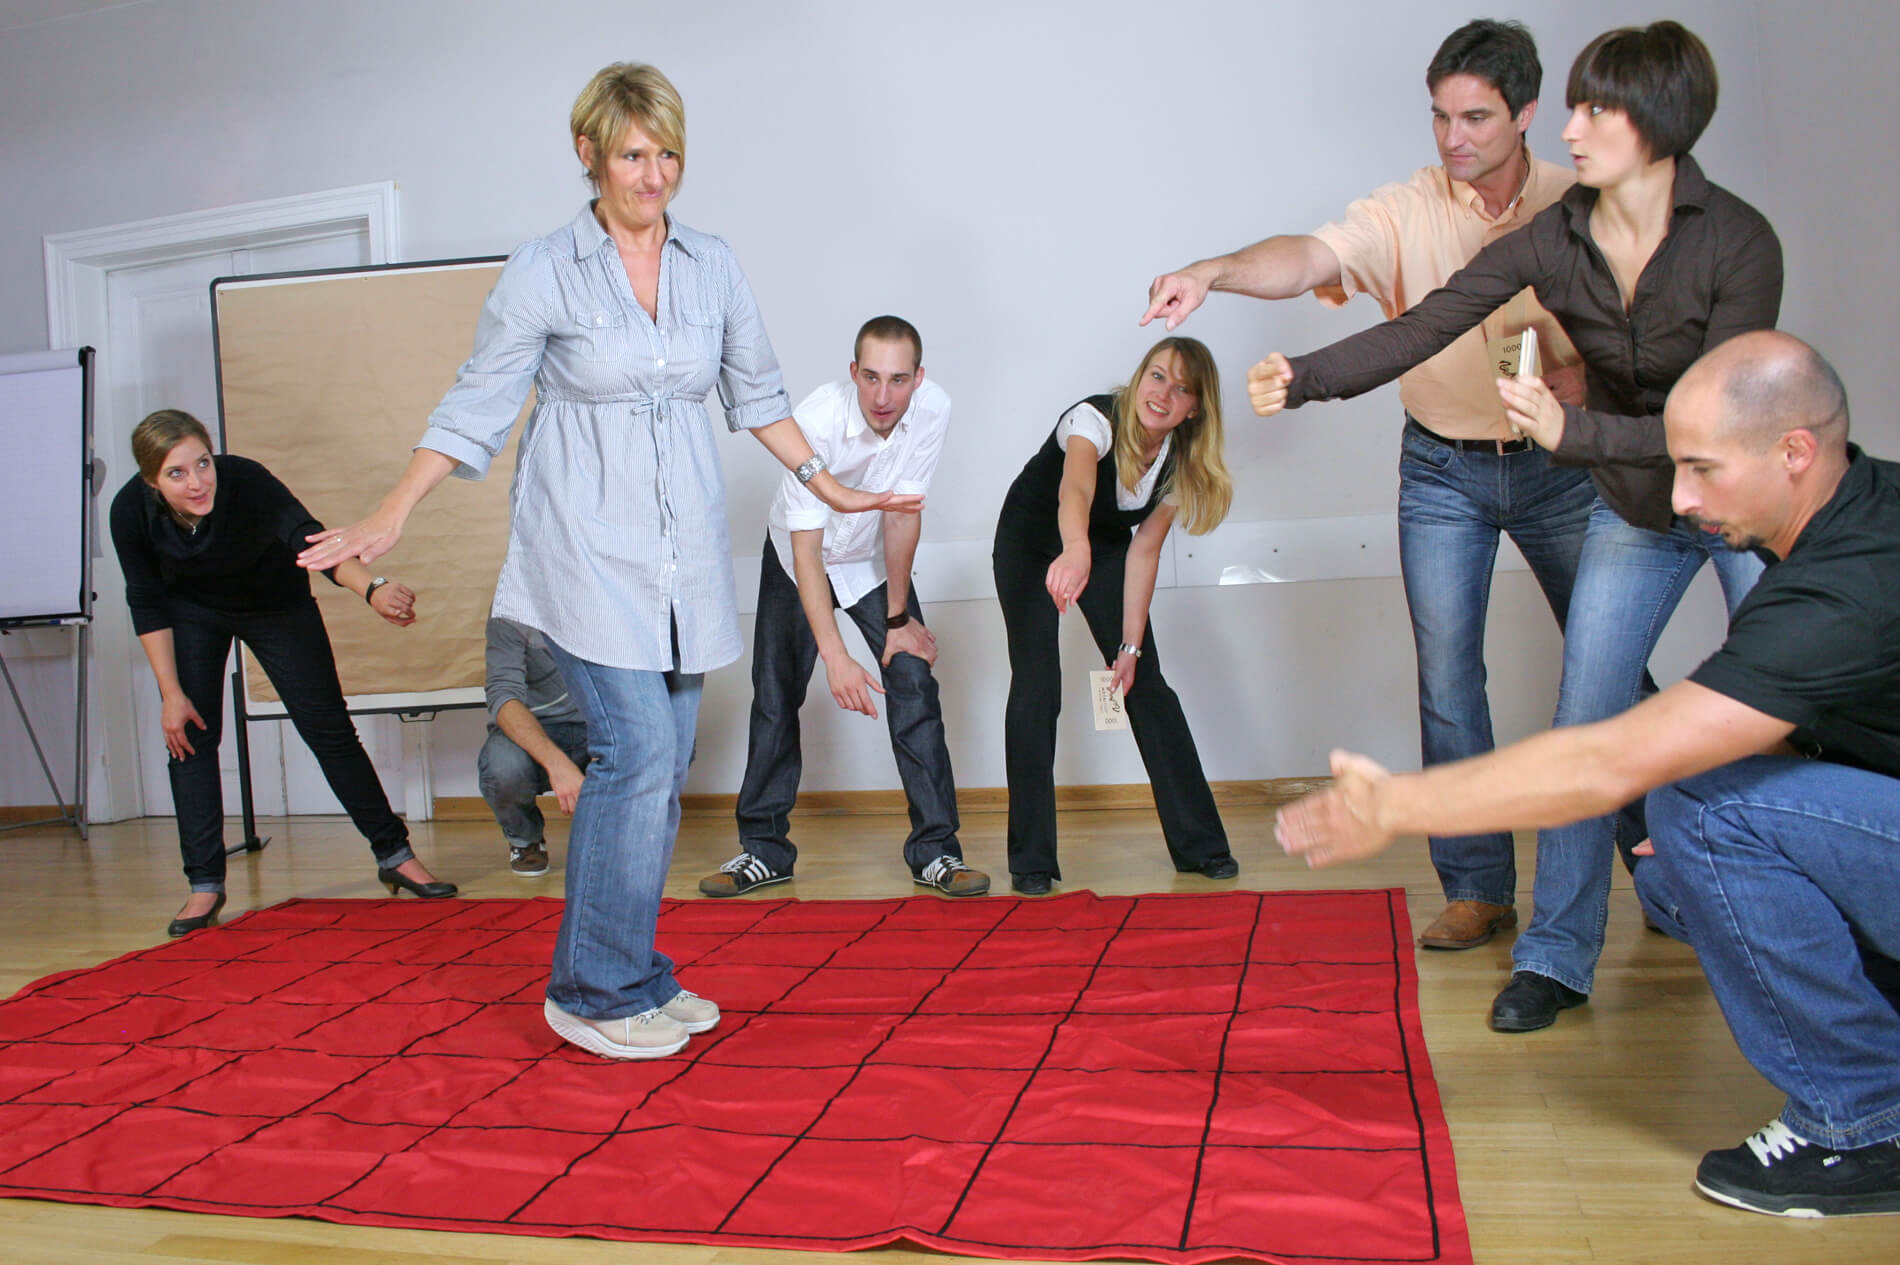 A work team tells a woman how to walk across a red floor mat in an activity called The Maze.